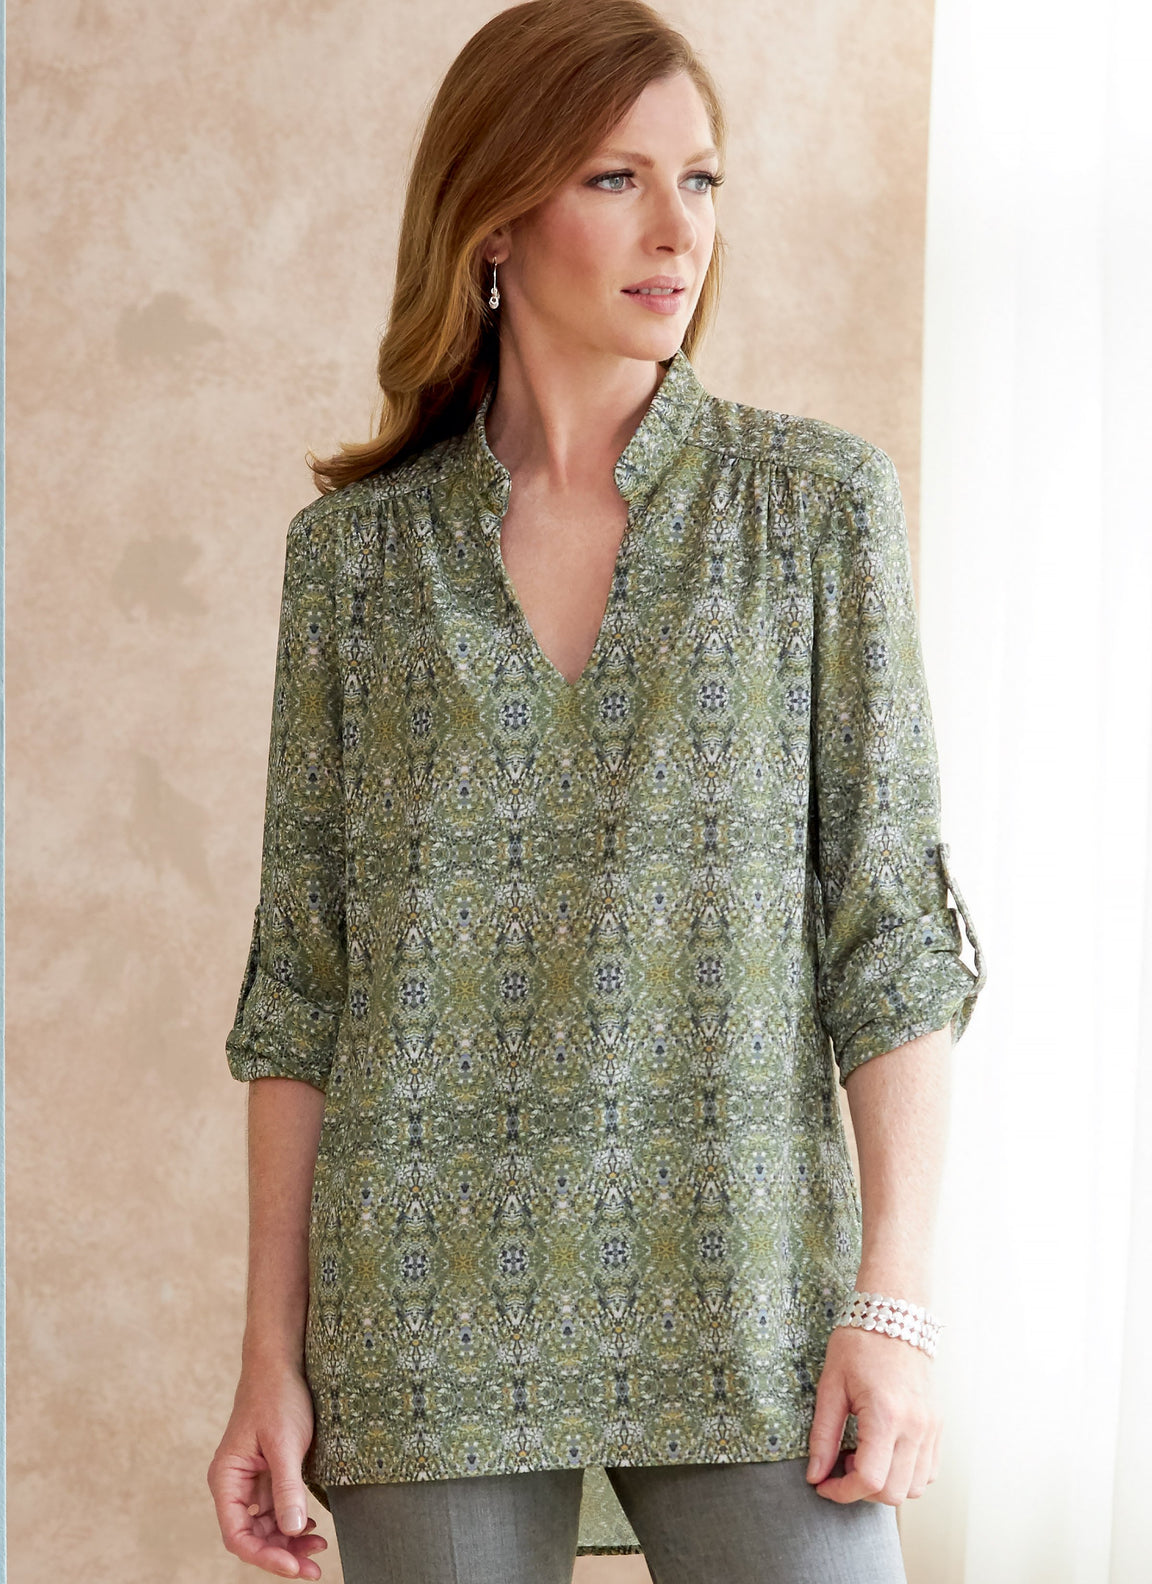 Sewing Patterns | Tops and Blouses — Page 13 — jaycotts.co.uk - Sewing ...